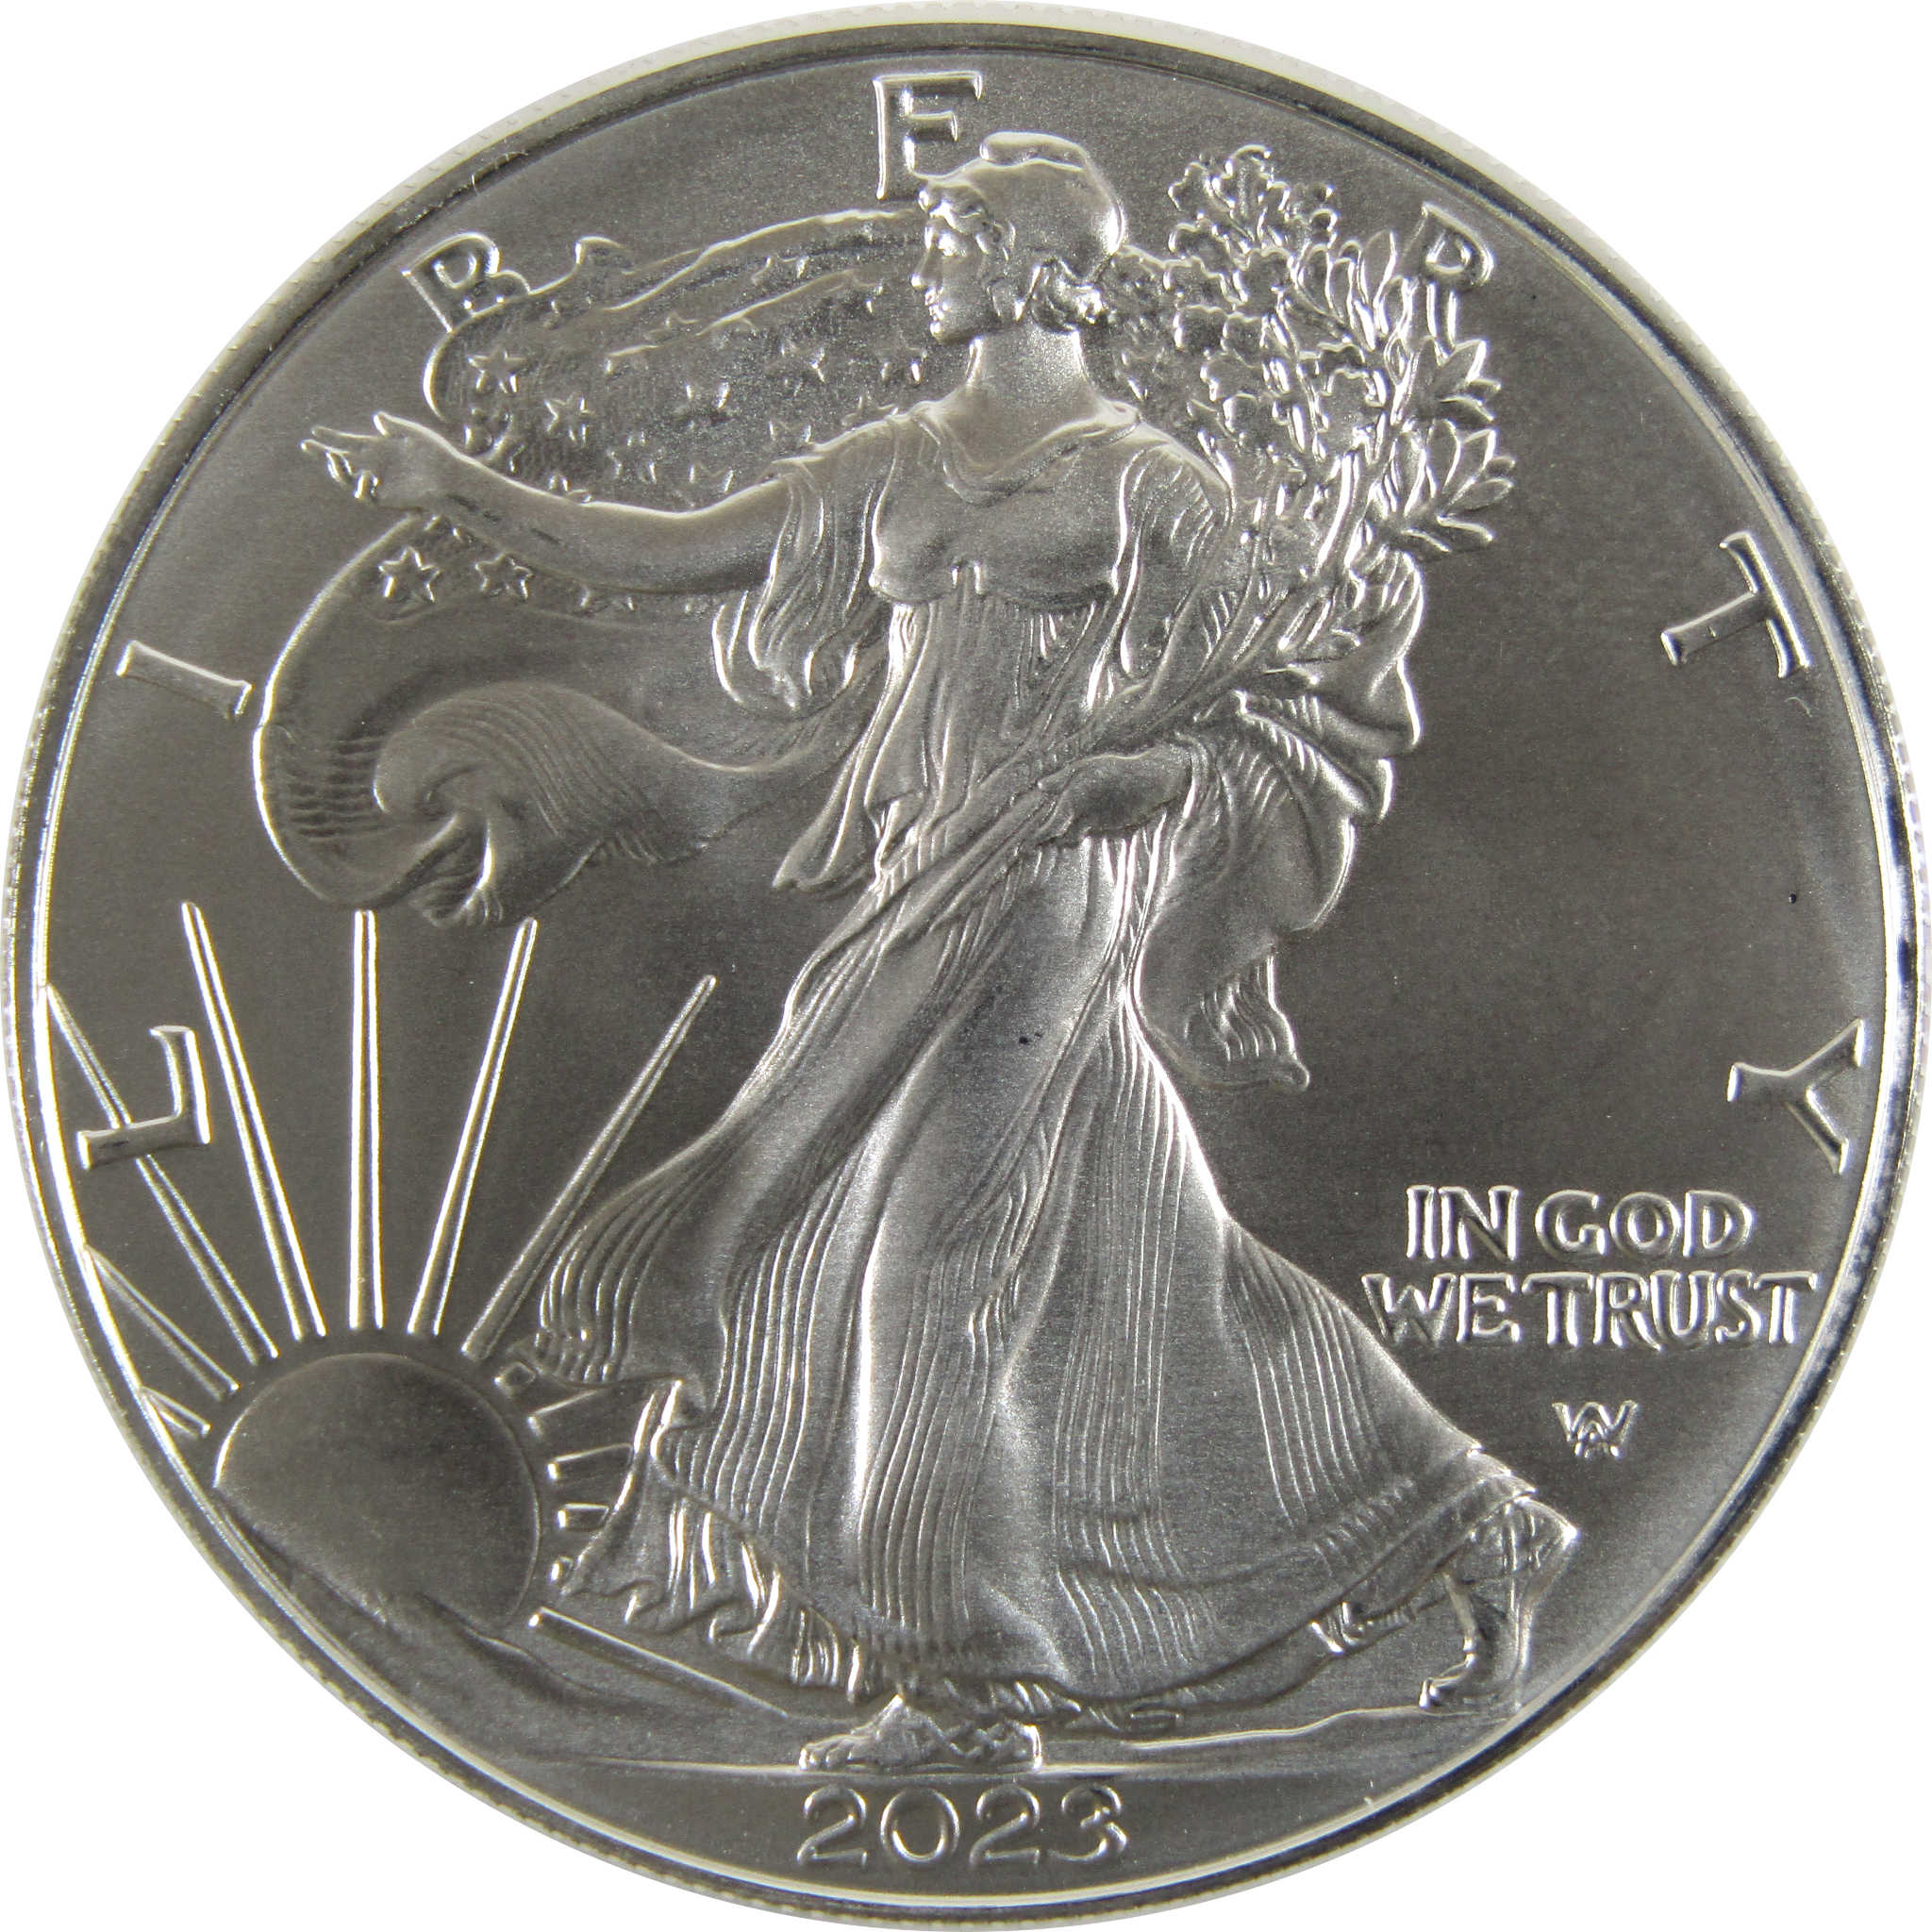 2020 - American Silver Eagle .999 Fine Silver with Our Certificate